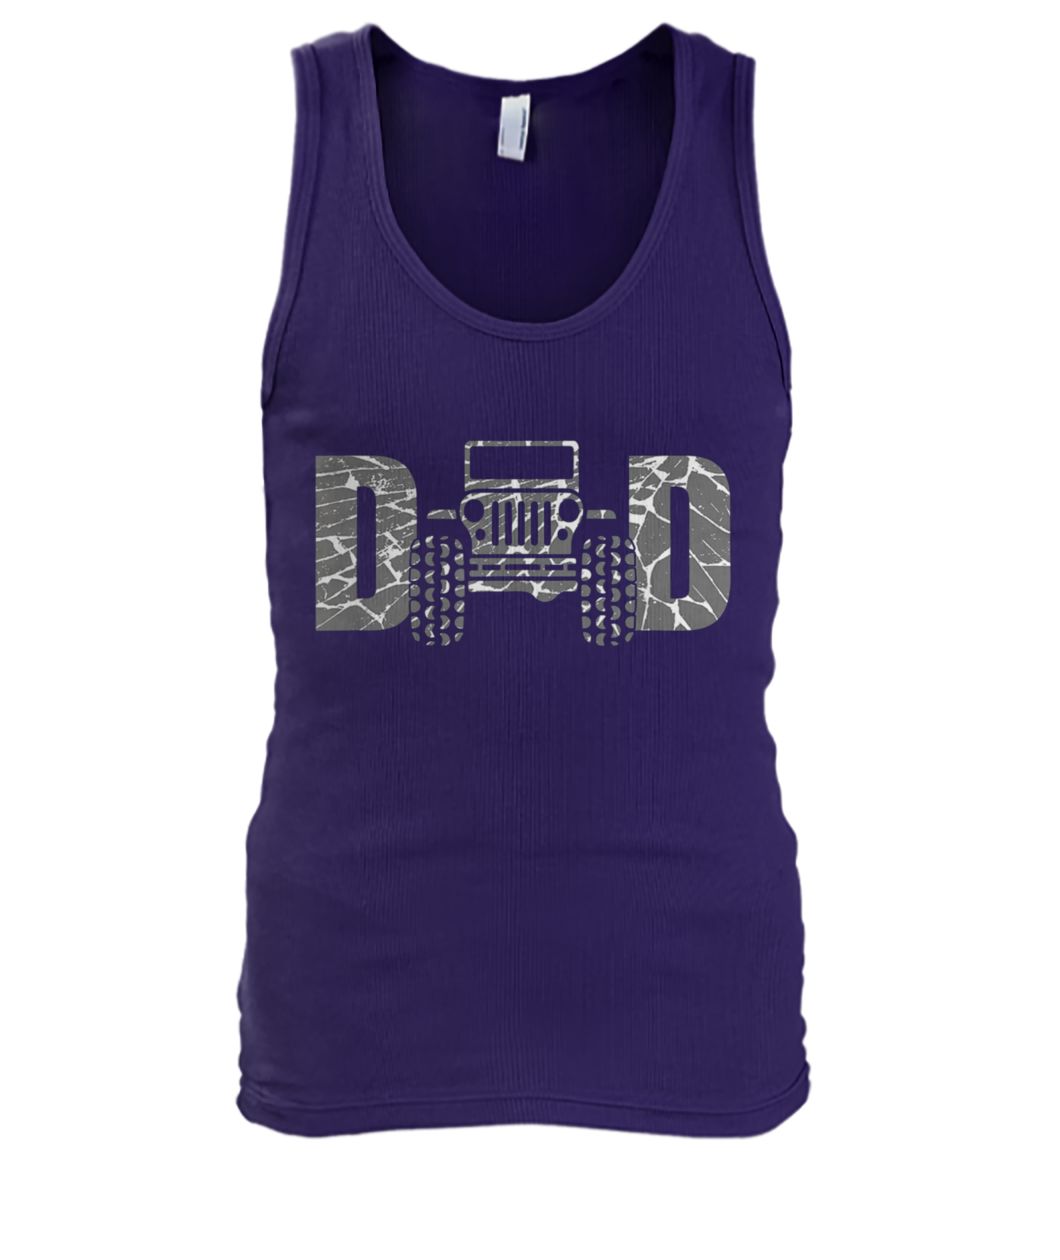 Jeep dad father's day men's tank top